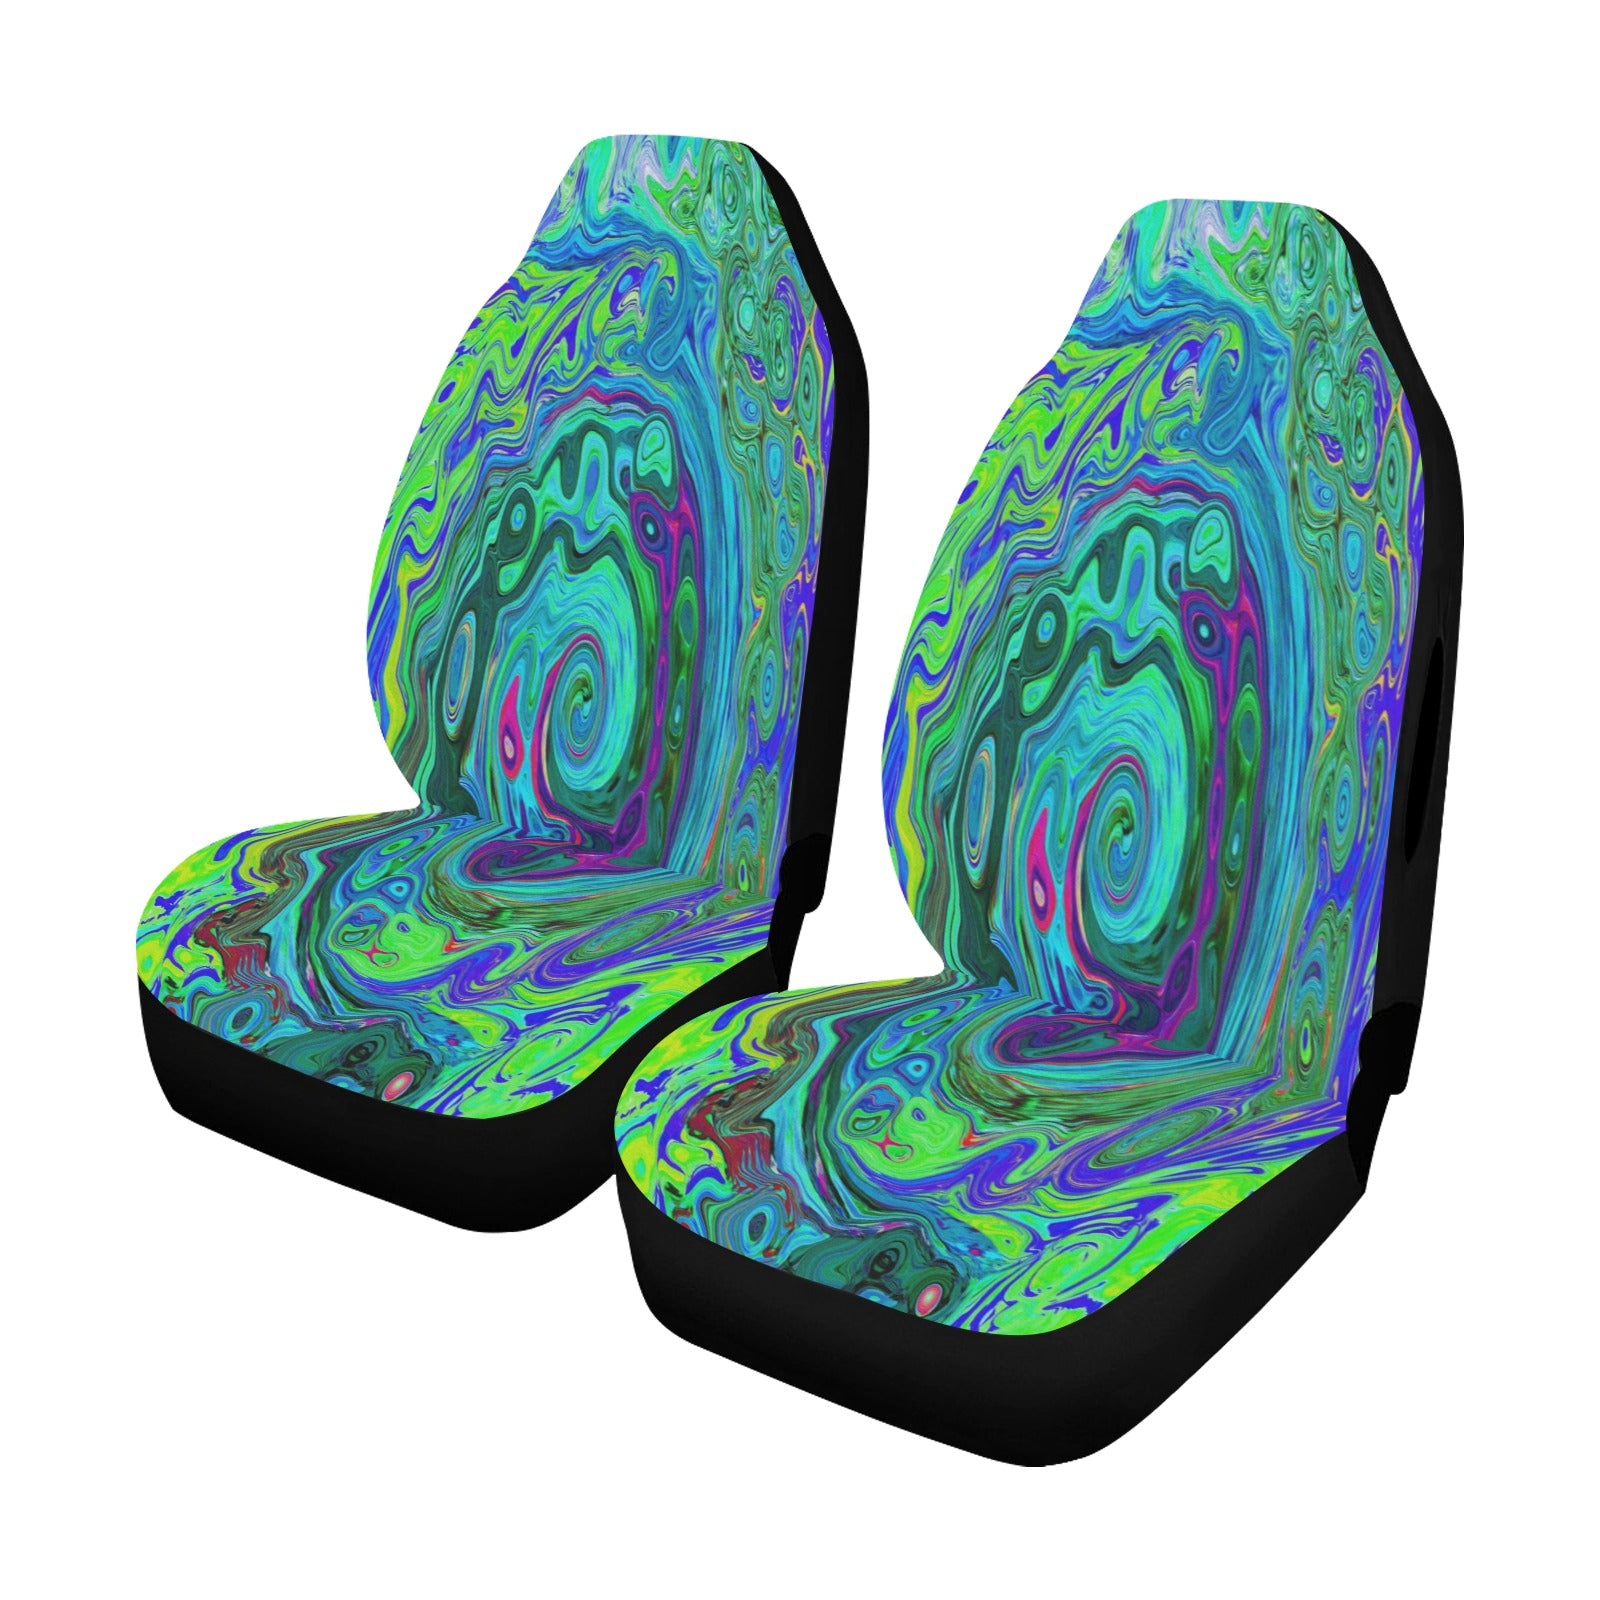 Car Seat Covers, Groovy Abstract Retro Green and Blue Swirl